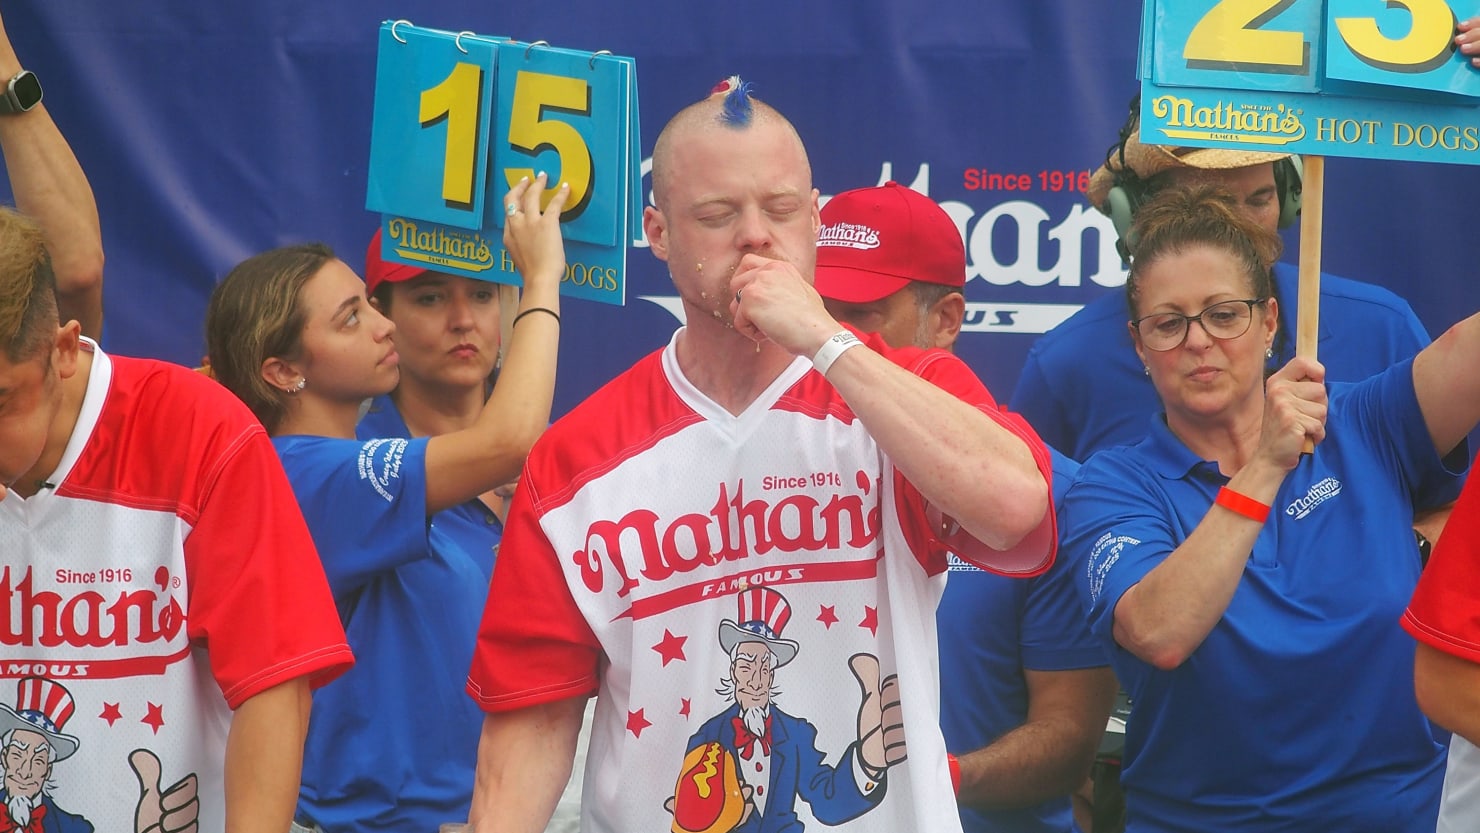 Nick Wehry, fourth in Nathan’s Famous Hot Dog Contest, denies cheating rumors